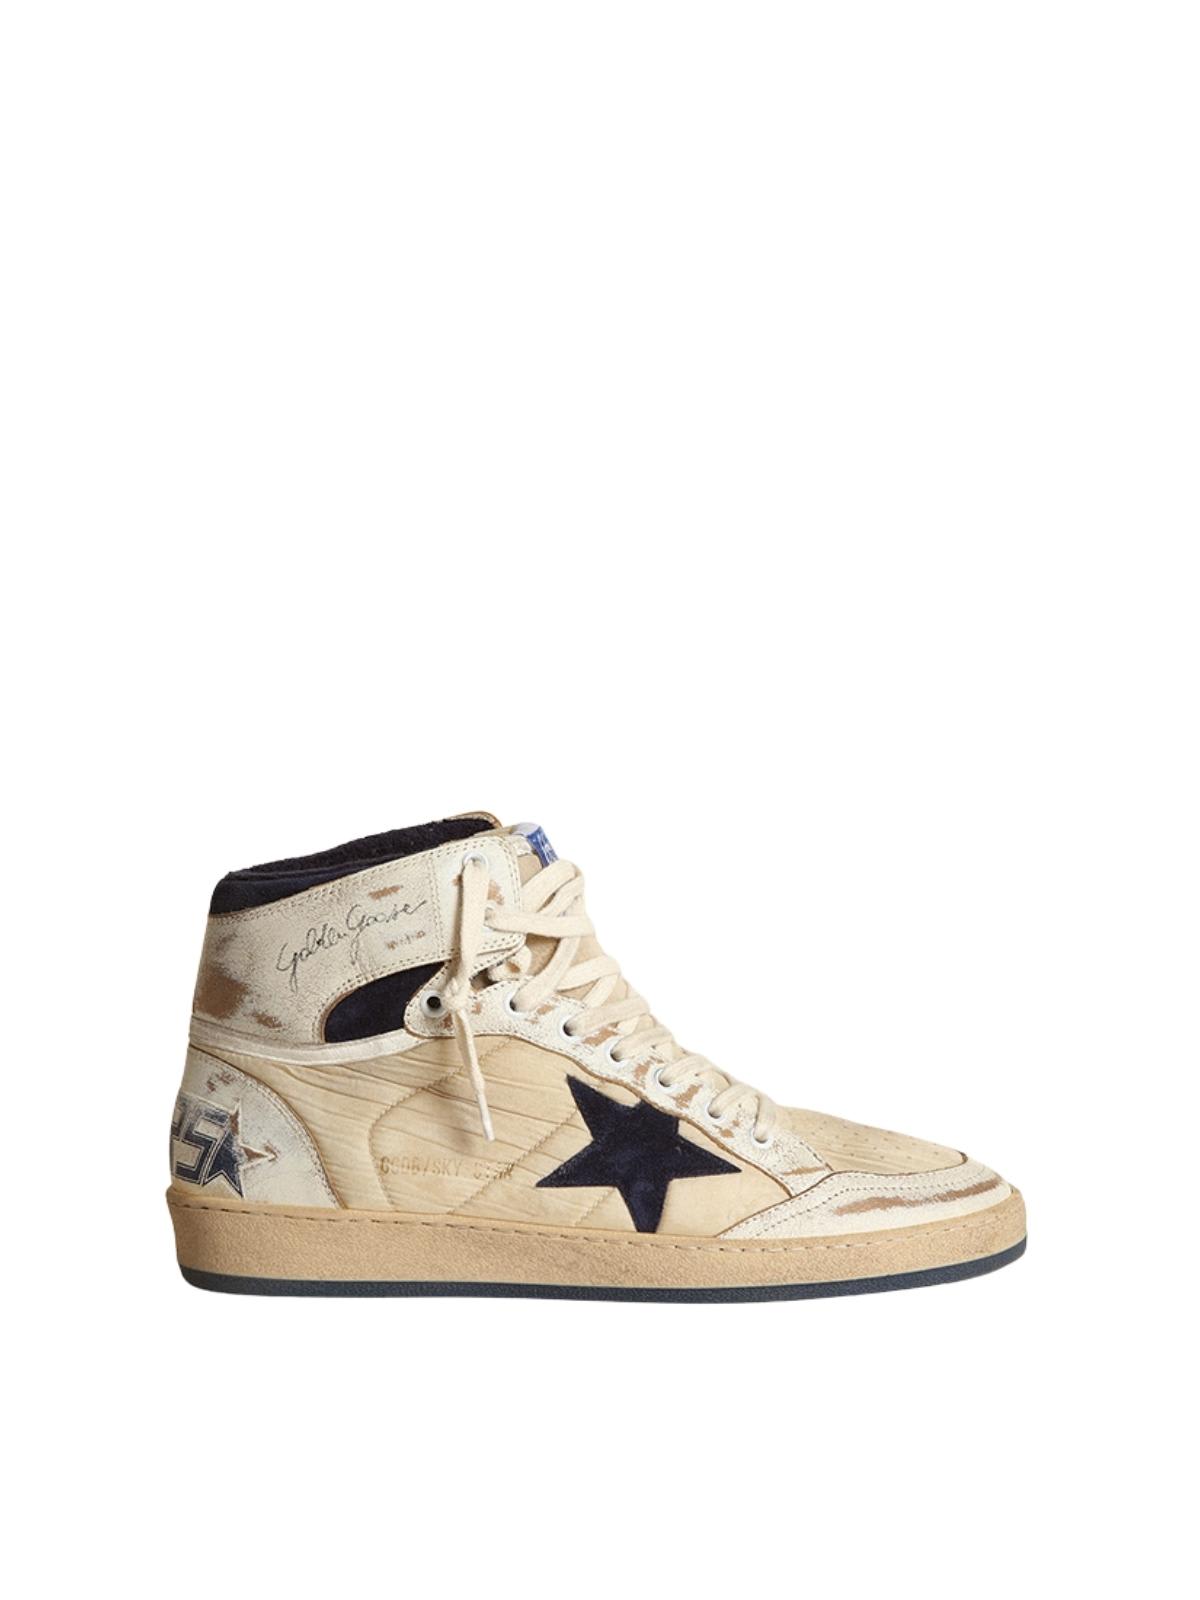 GOLDEN GOOSE SKY STAR SHINY LEATHER TOE AND SPUR NYLON UPPER SUEDE STAR